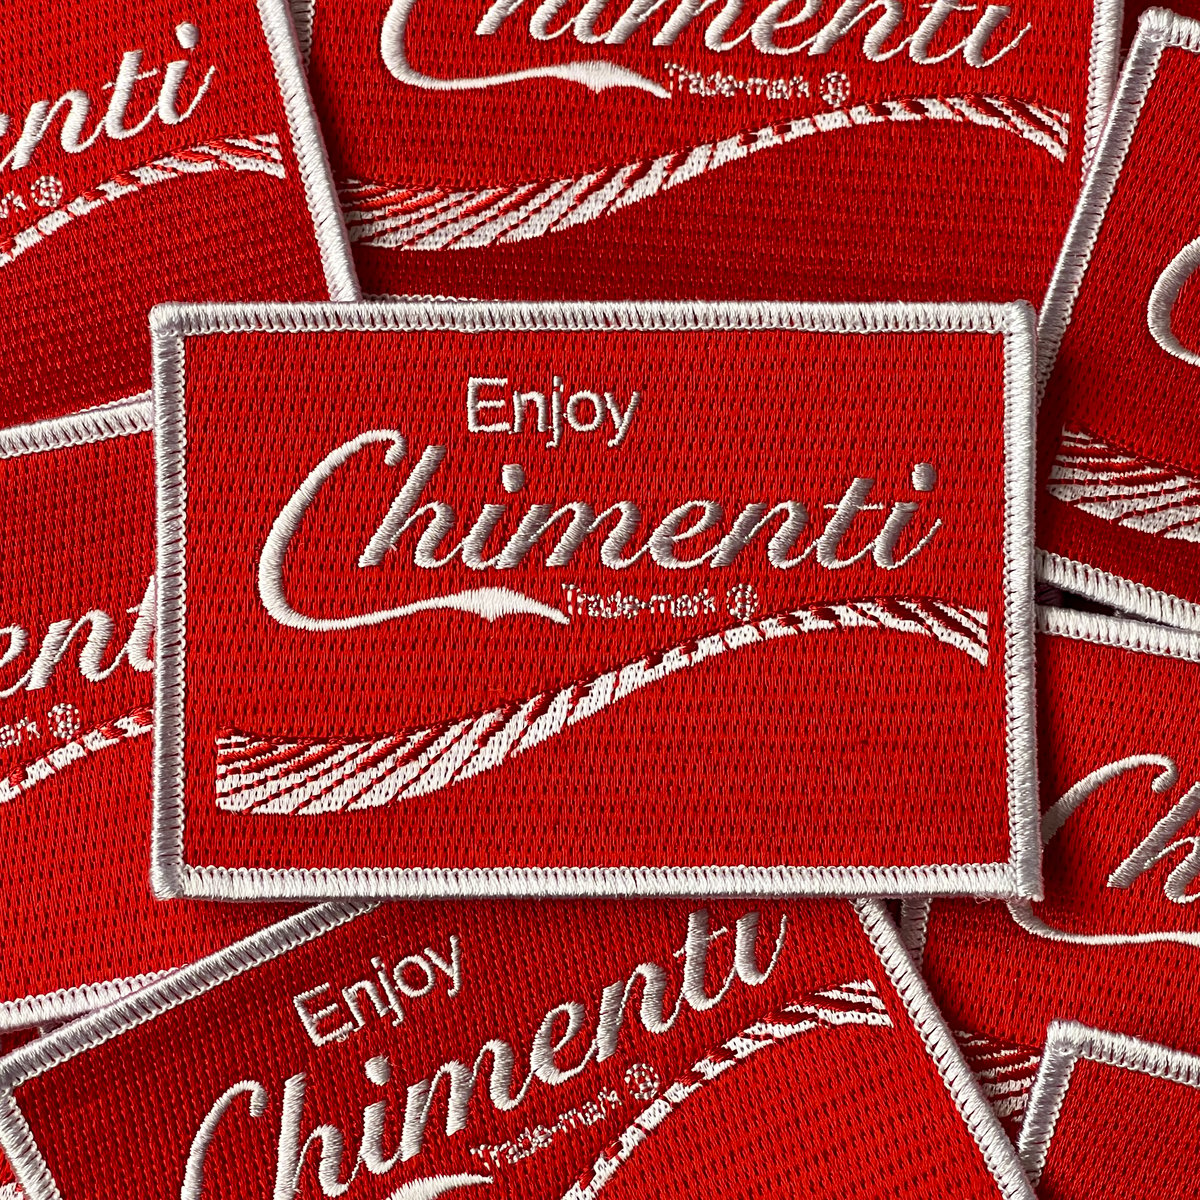 Enjoy Chimenti Embroidered Patch - 3' x 4' inch